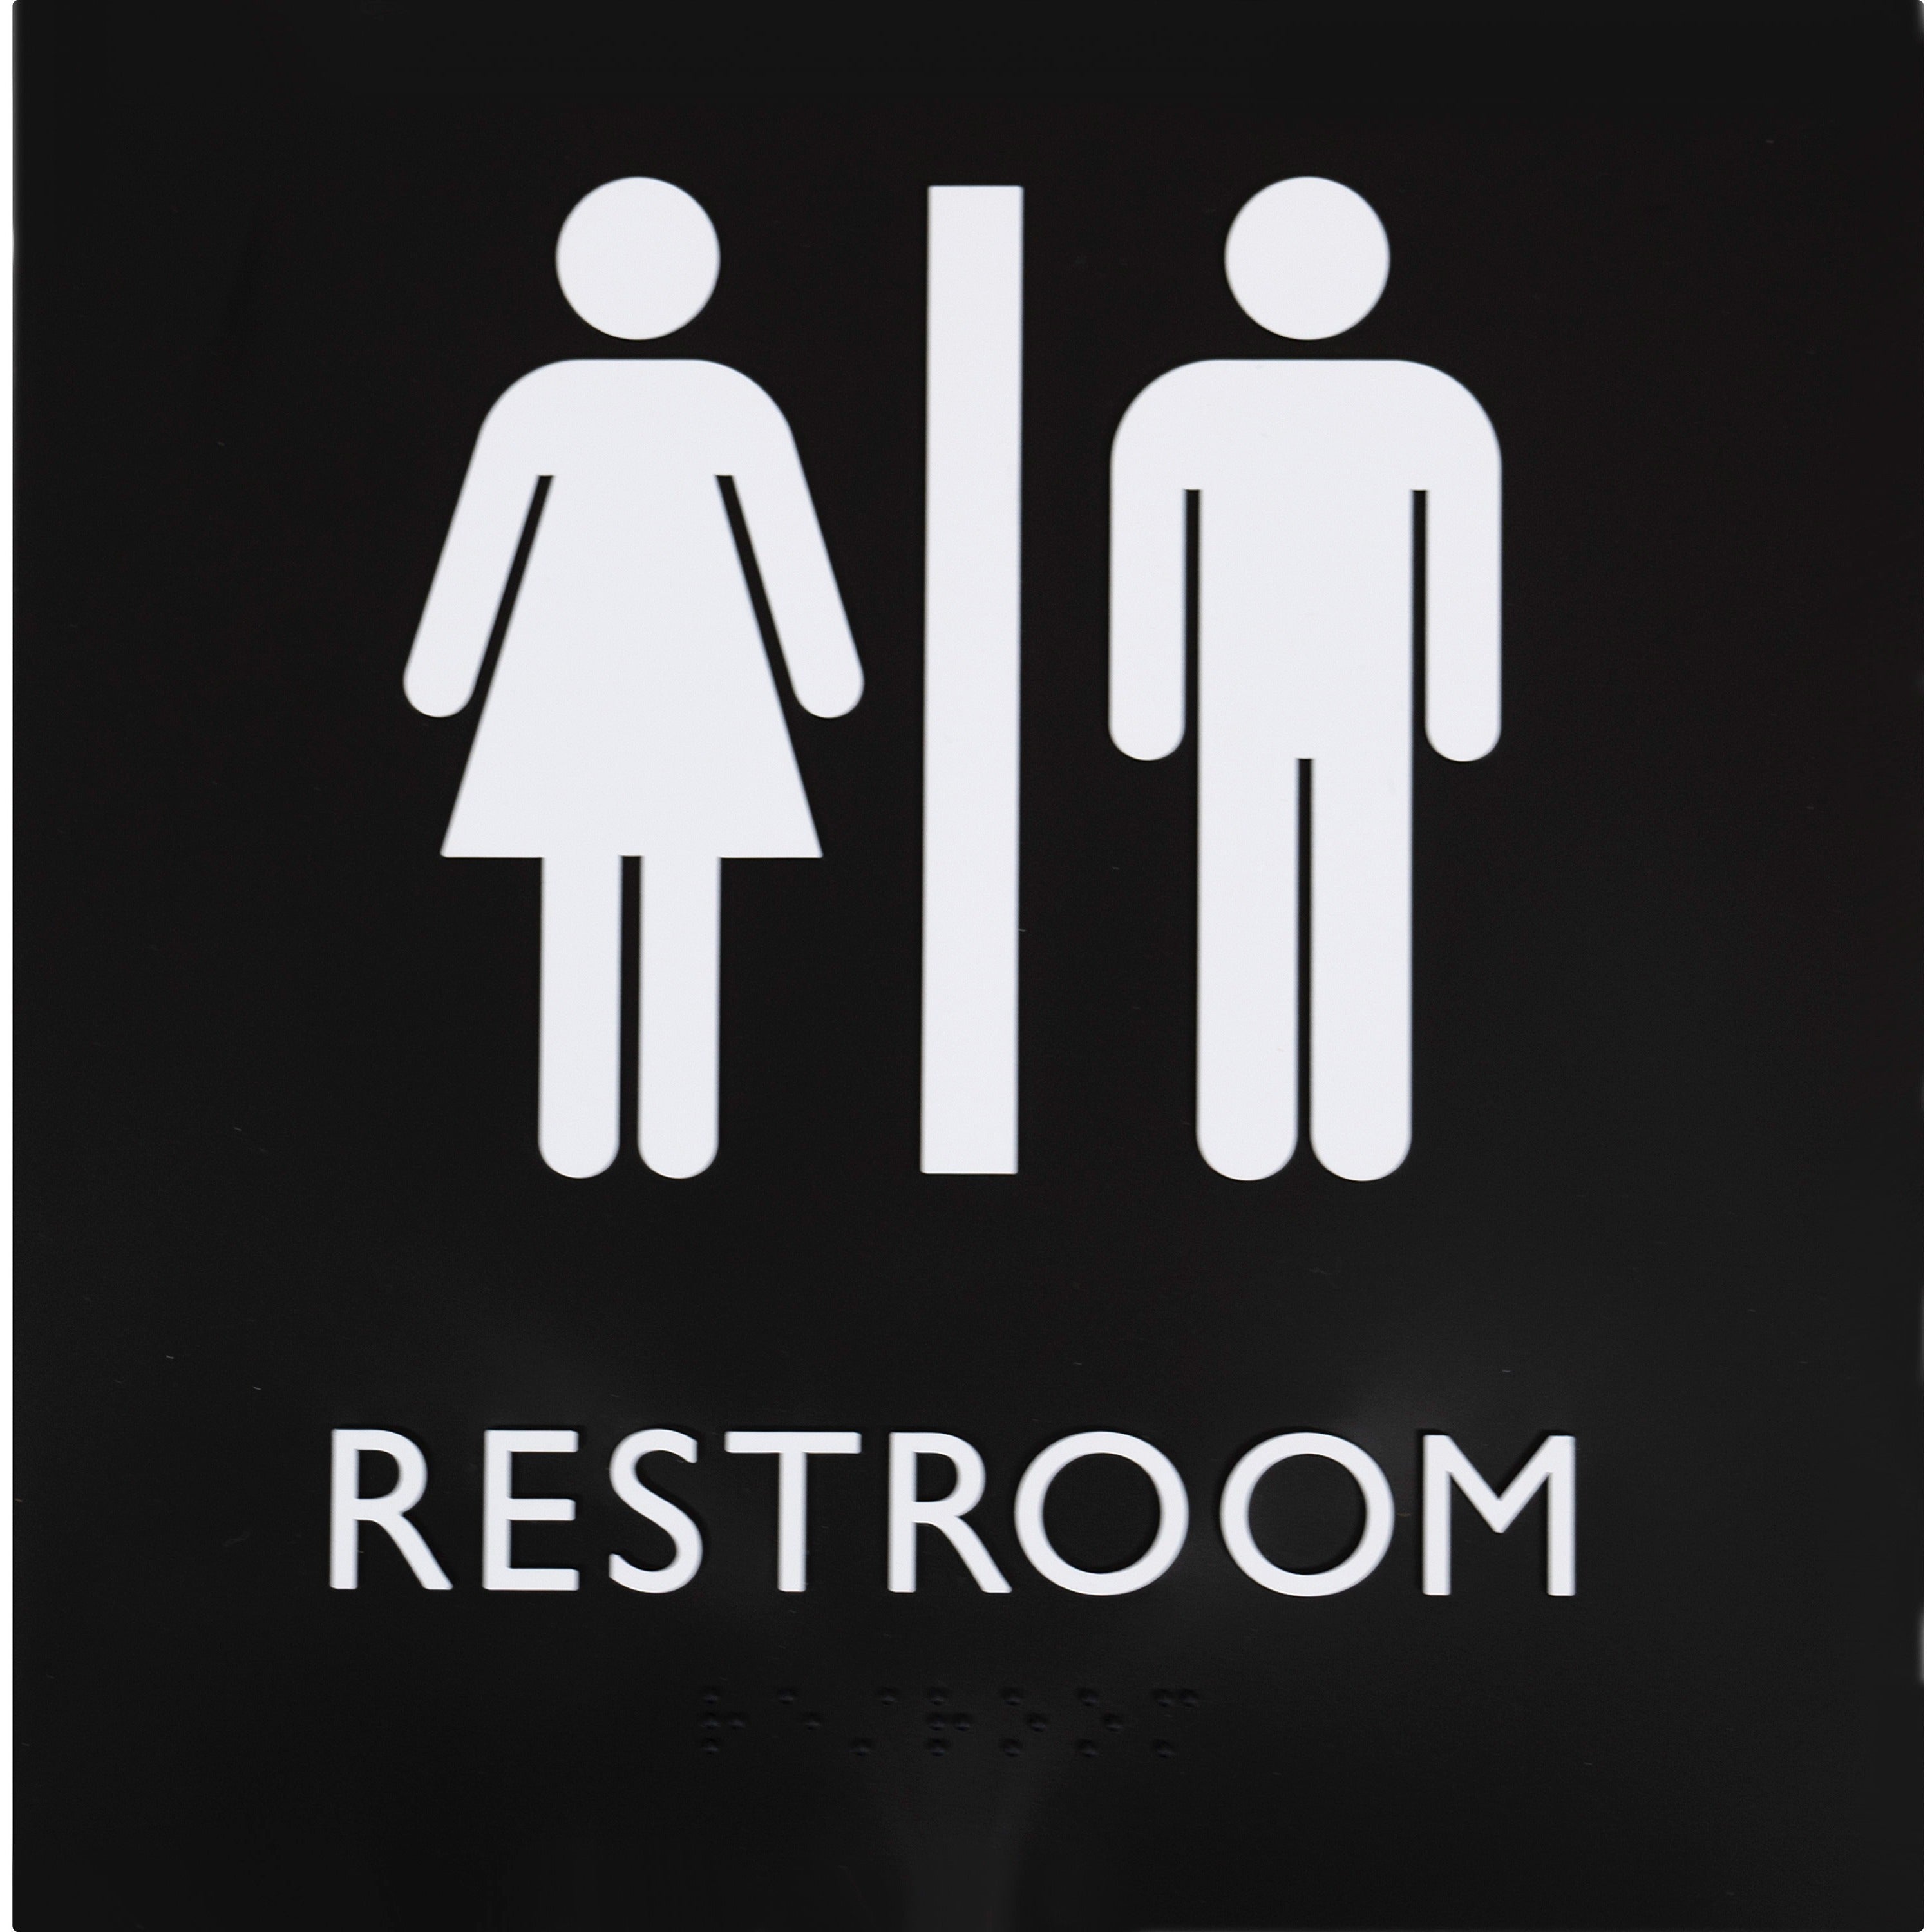 lorell-unisex-restroom-sign-1-each-8-width-x-8-height-square-shape-easy-readability-injection-molded-plastic-black-black_llr02654 - 1